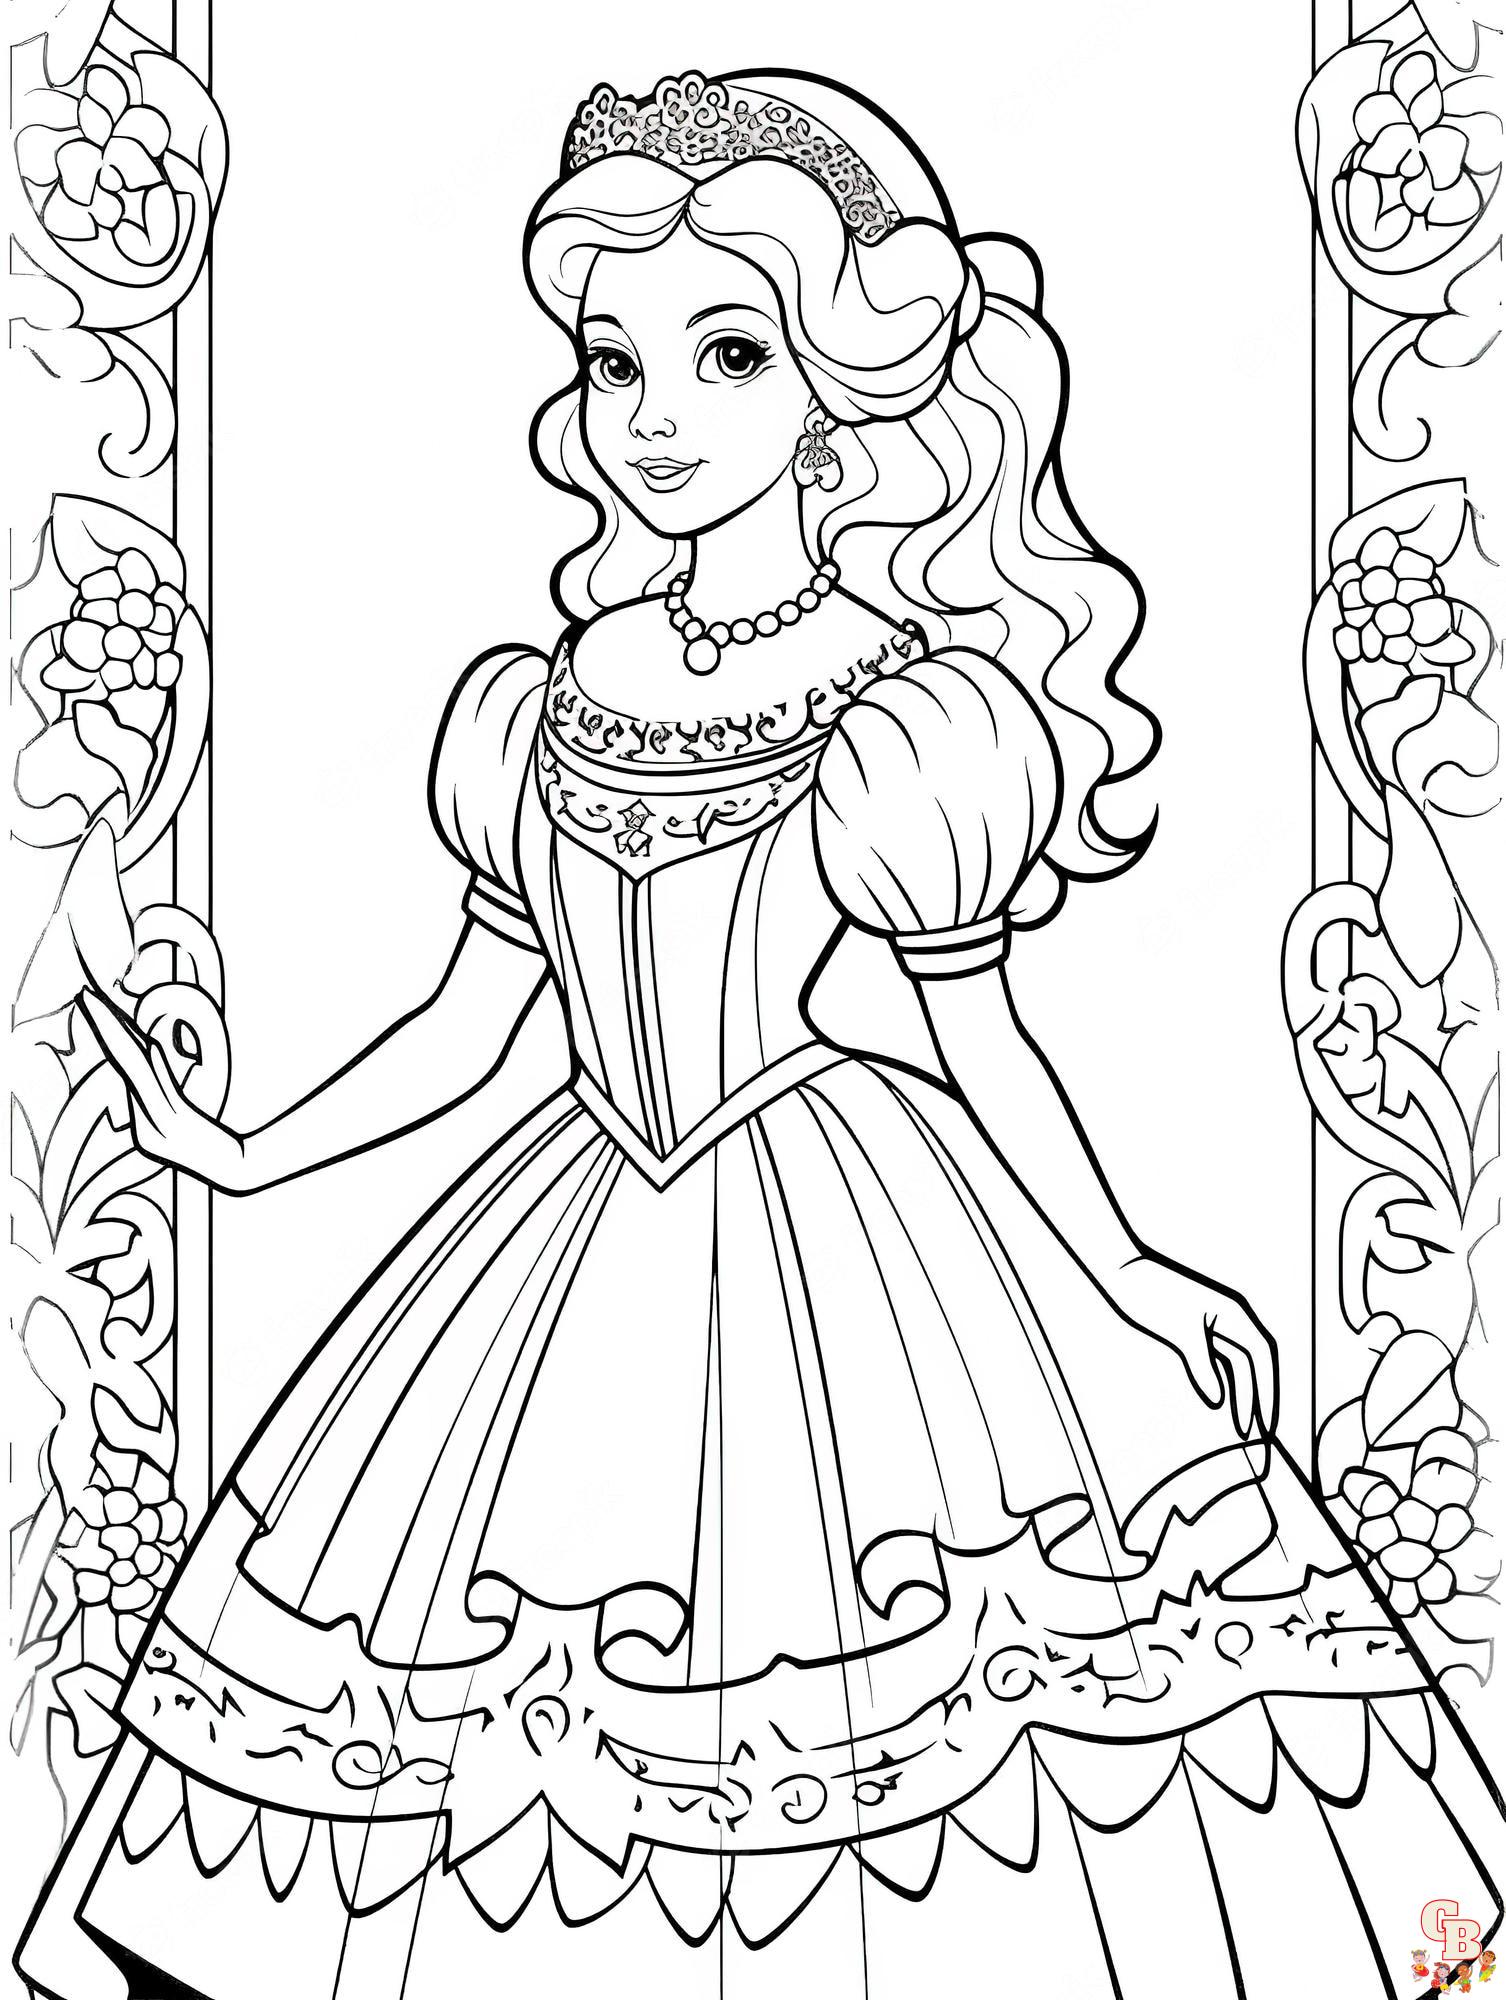 Barbie coloring for free - The best Barbie coloring pages for children